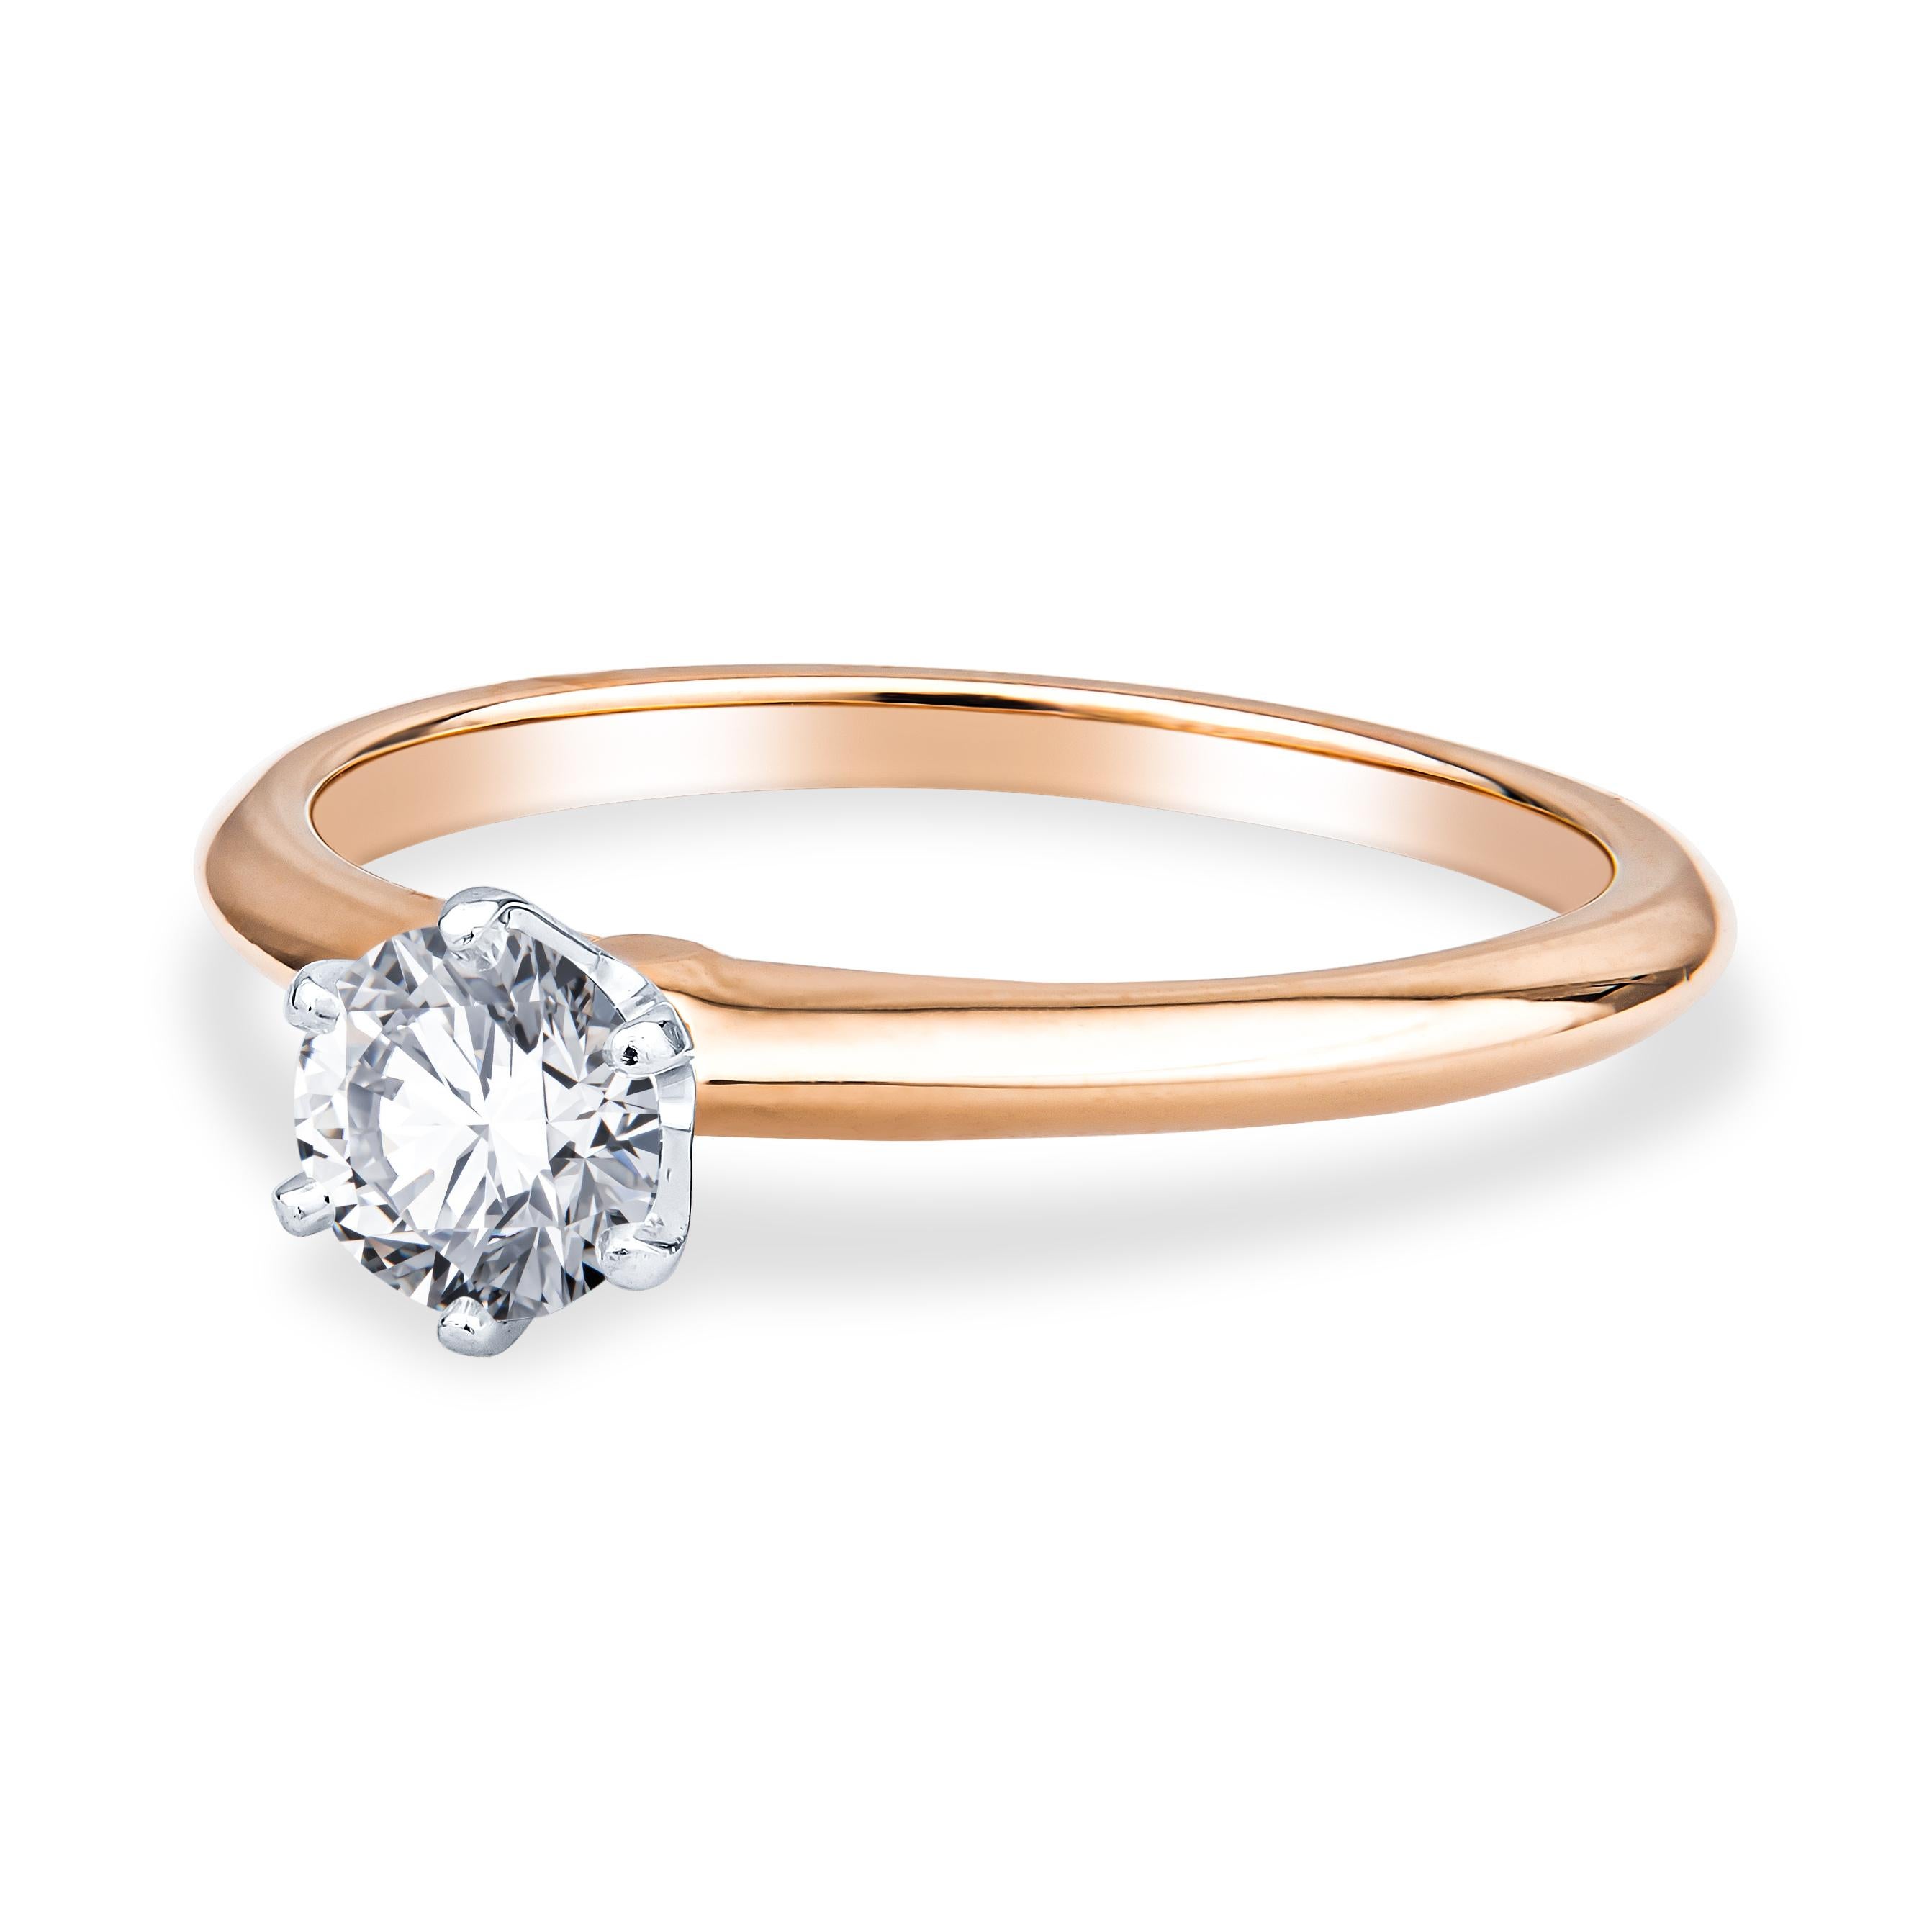 This precious Tiffany & Co. engagement ring features a dainty 0.57ct round brilliant cut diamond, I VS1. The diamond is placed in a platinum setting and an 18kt rose gold engagement ring. The ring has a Tiffany Report (#673950). It is currently a